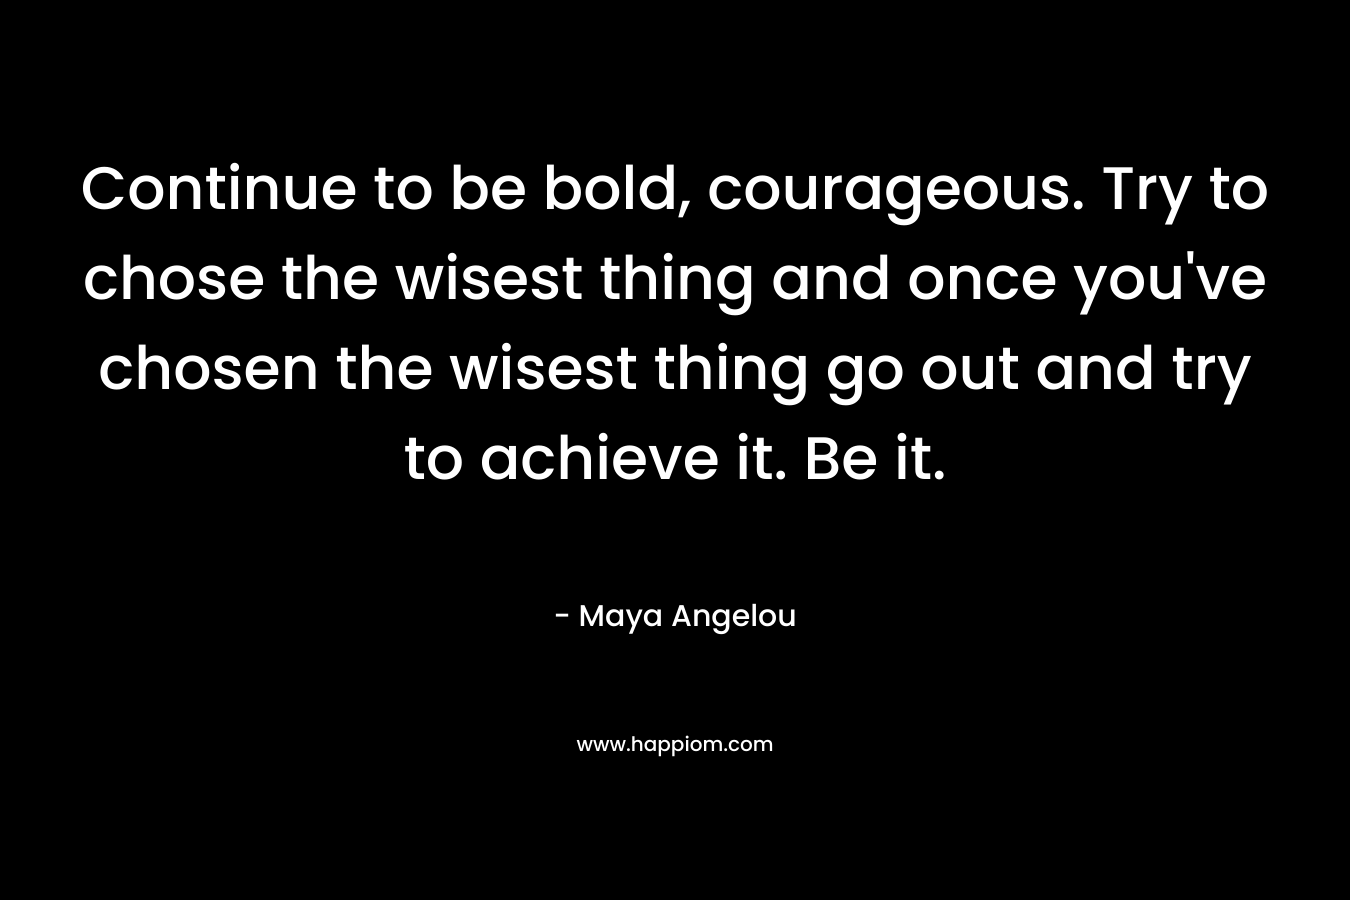 Continue to be bold, courageous. Try to chose the wisest thing and once you've chosen the wisest thing go out and try to achieve it. Be it.